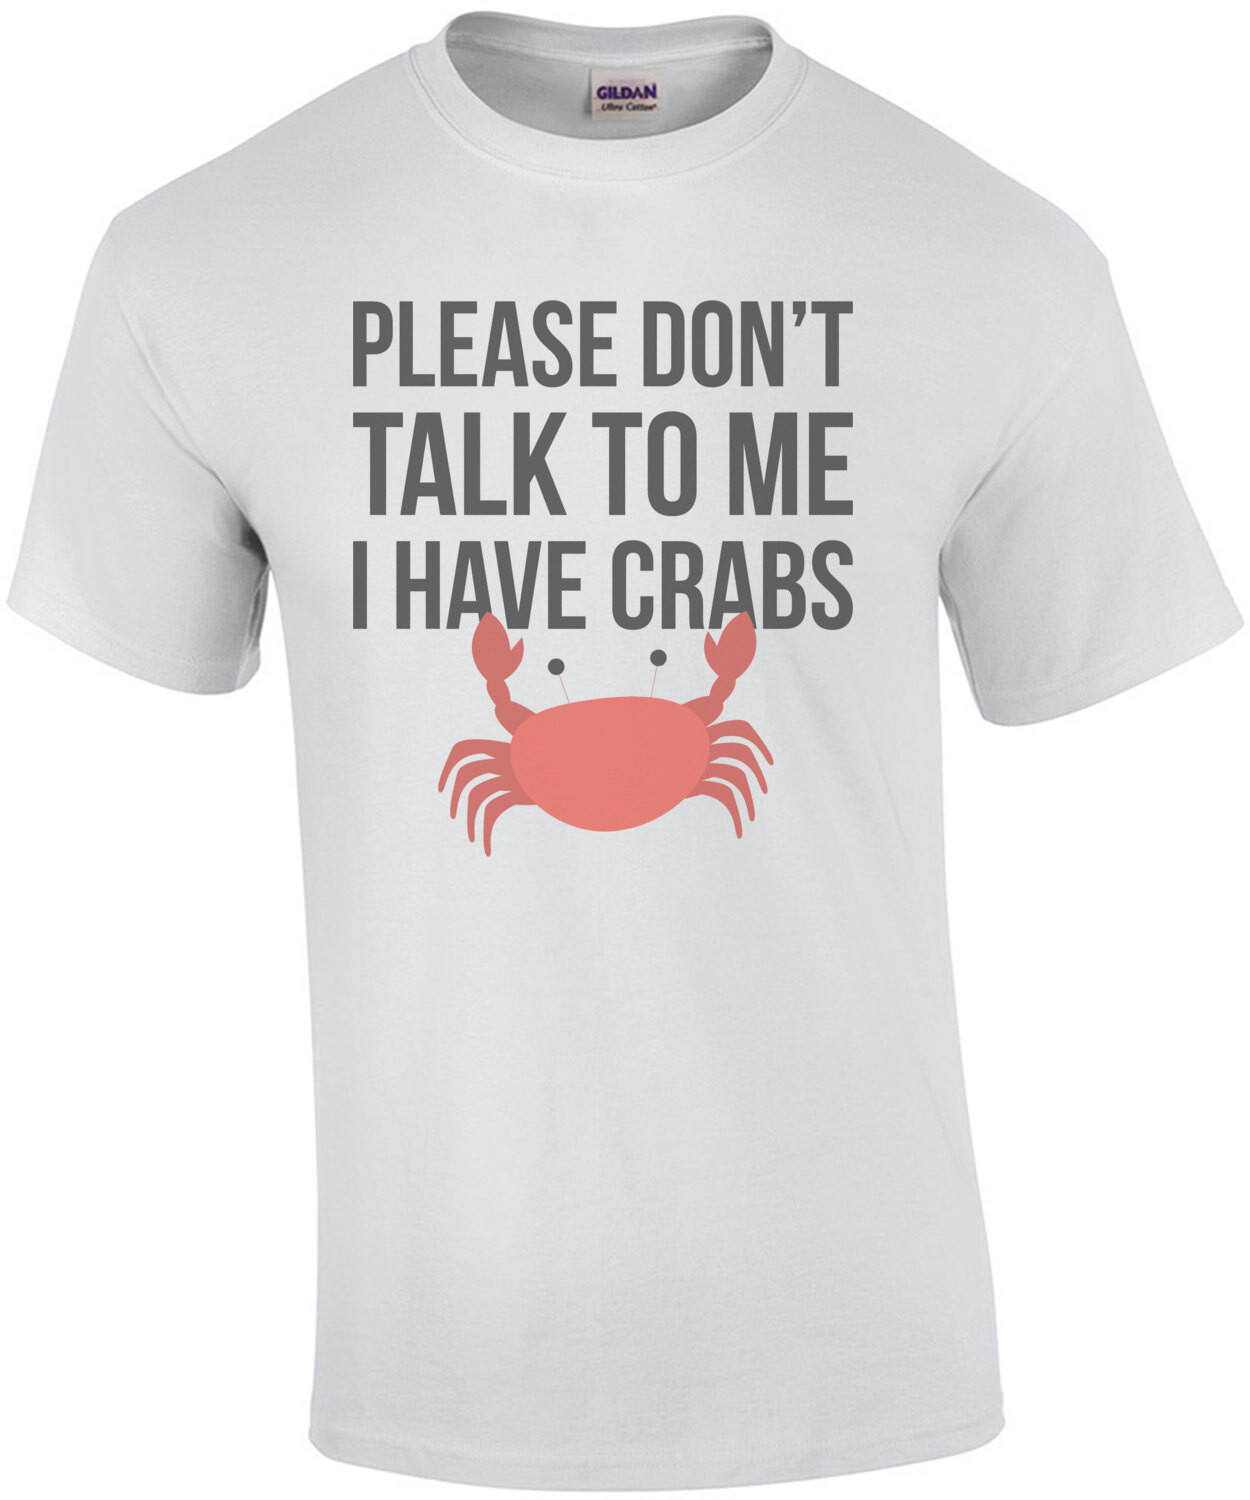 Please don't talk to me I have crabs - funny t-shirt